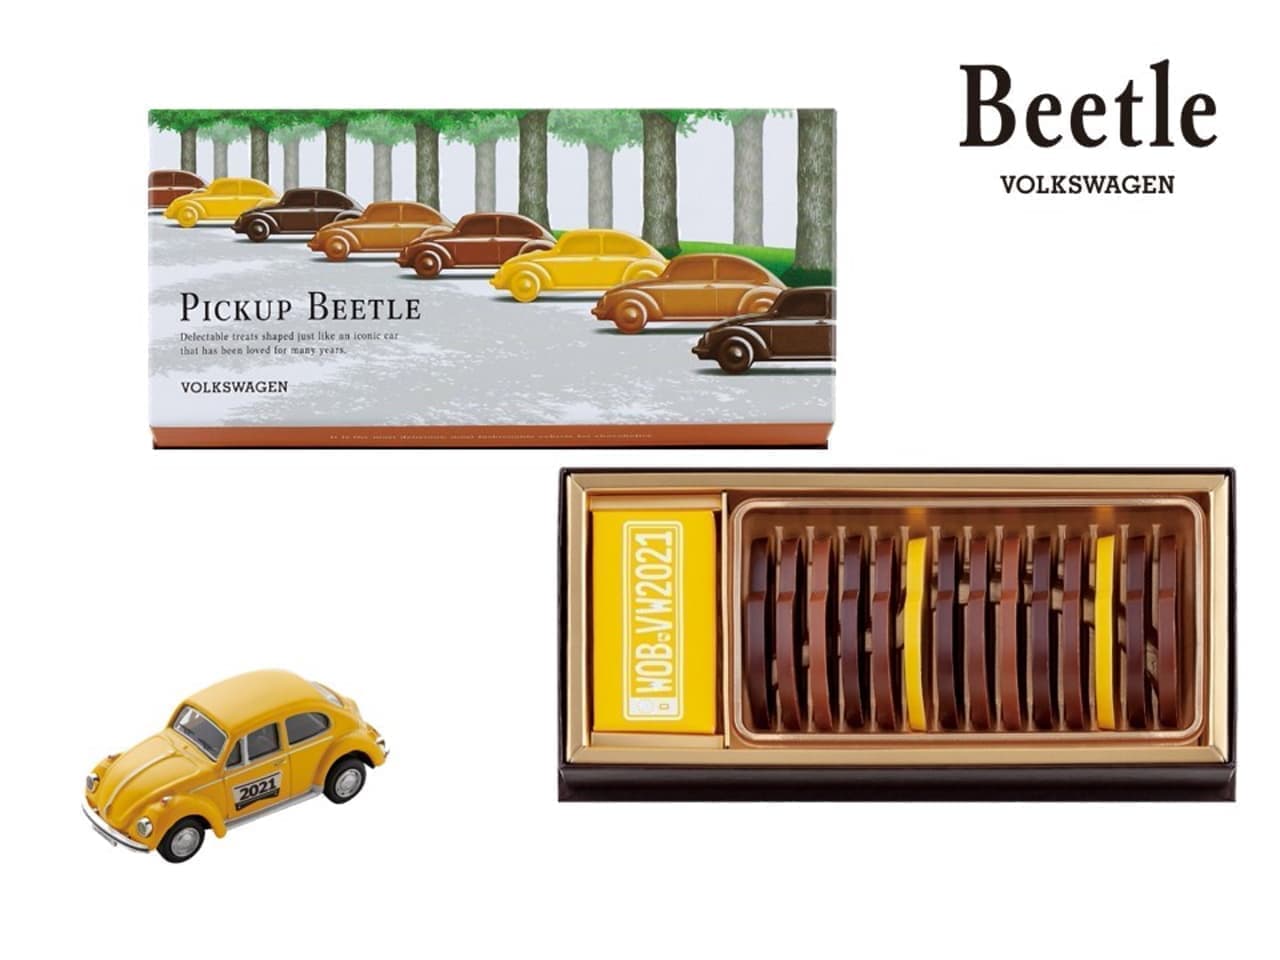 Morozoff and Volkswagen "Beetle" collaboration chocolate